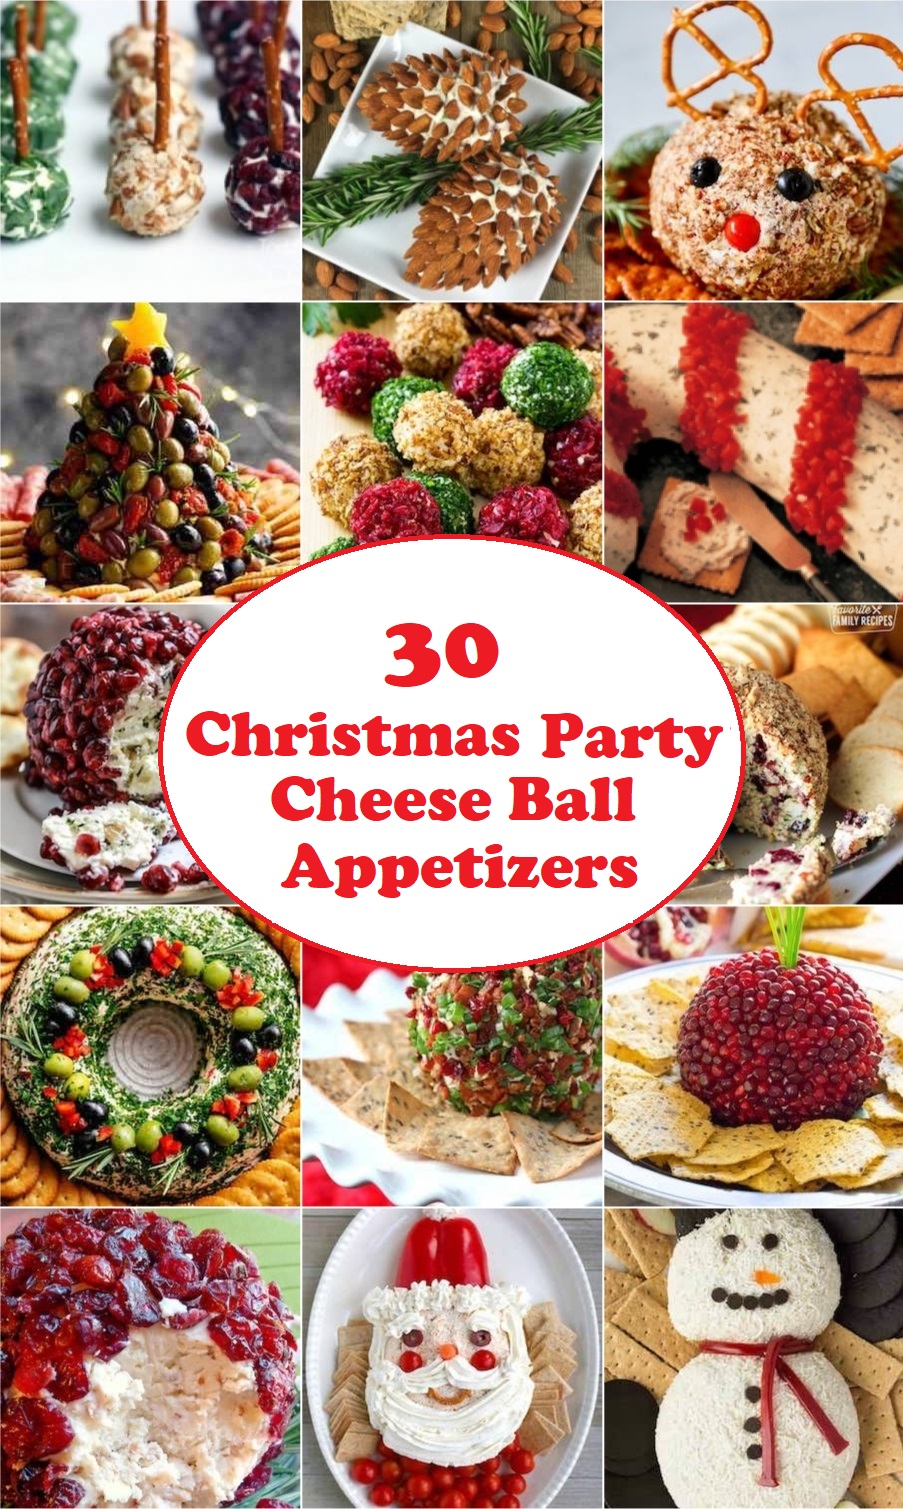 30 Christmas Party Cheese Ball Appetizers | Фотограф Марина Зайцева